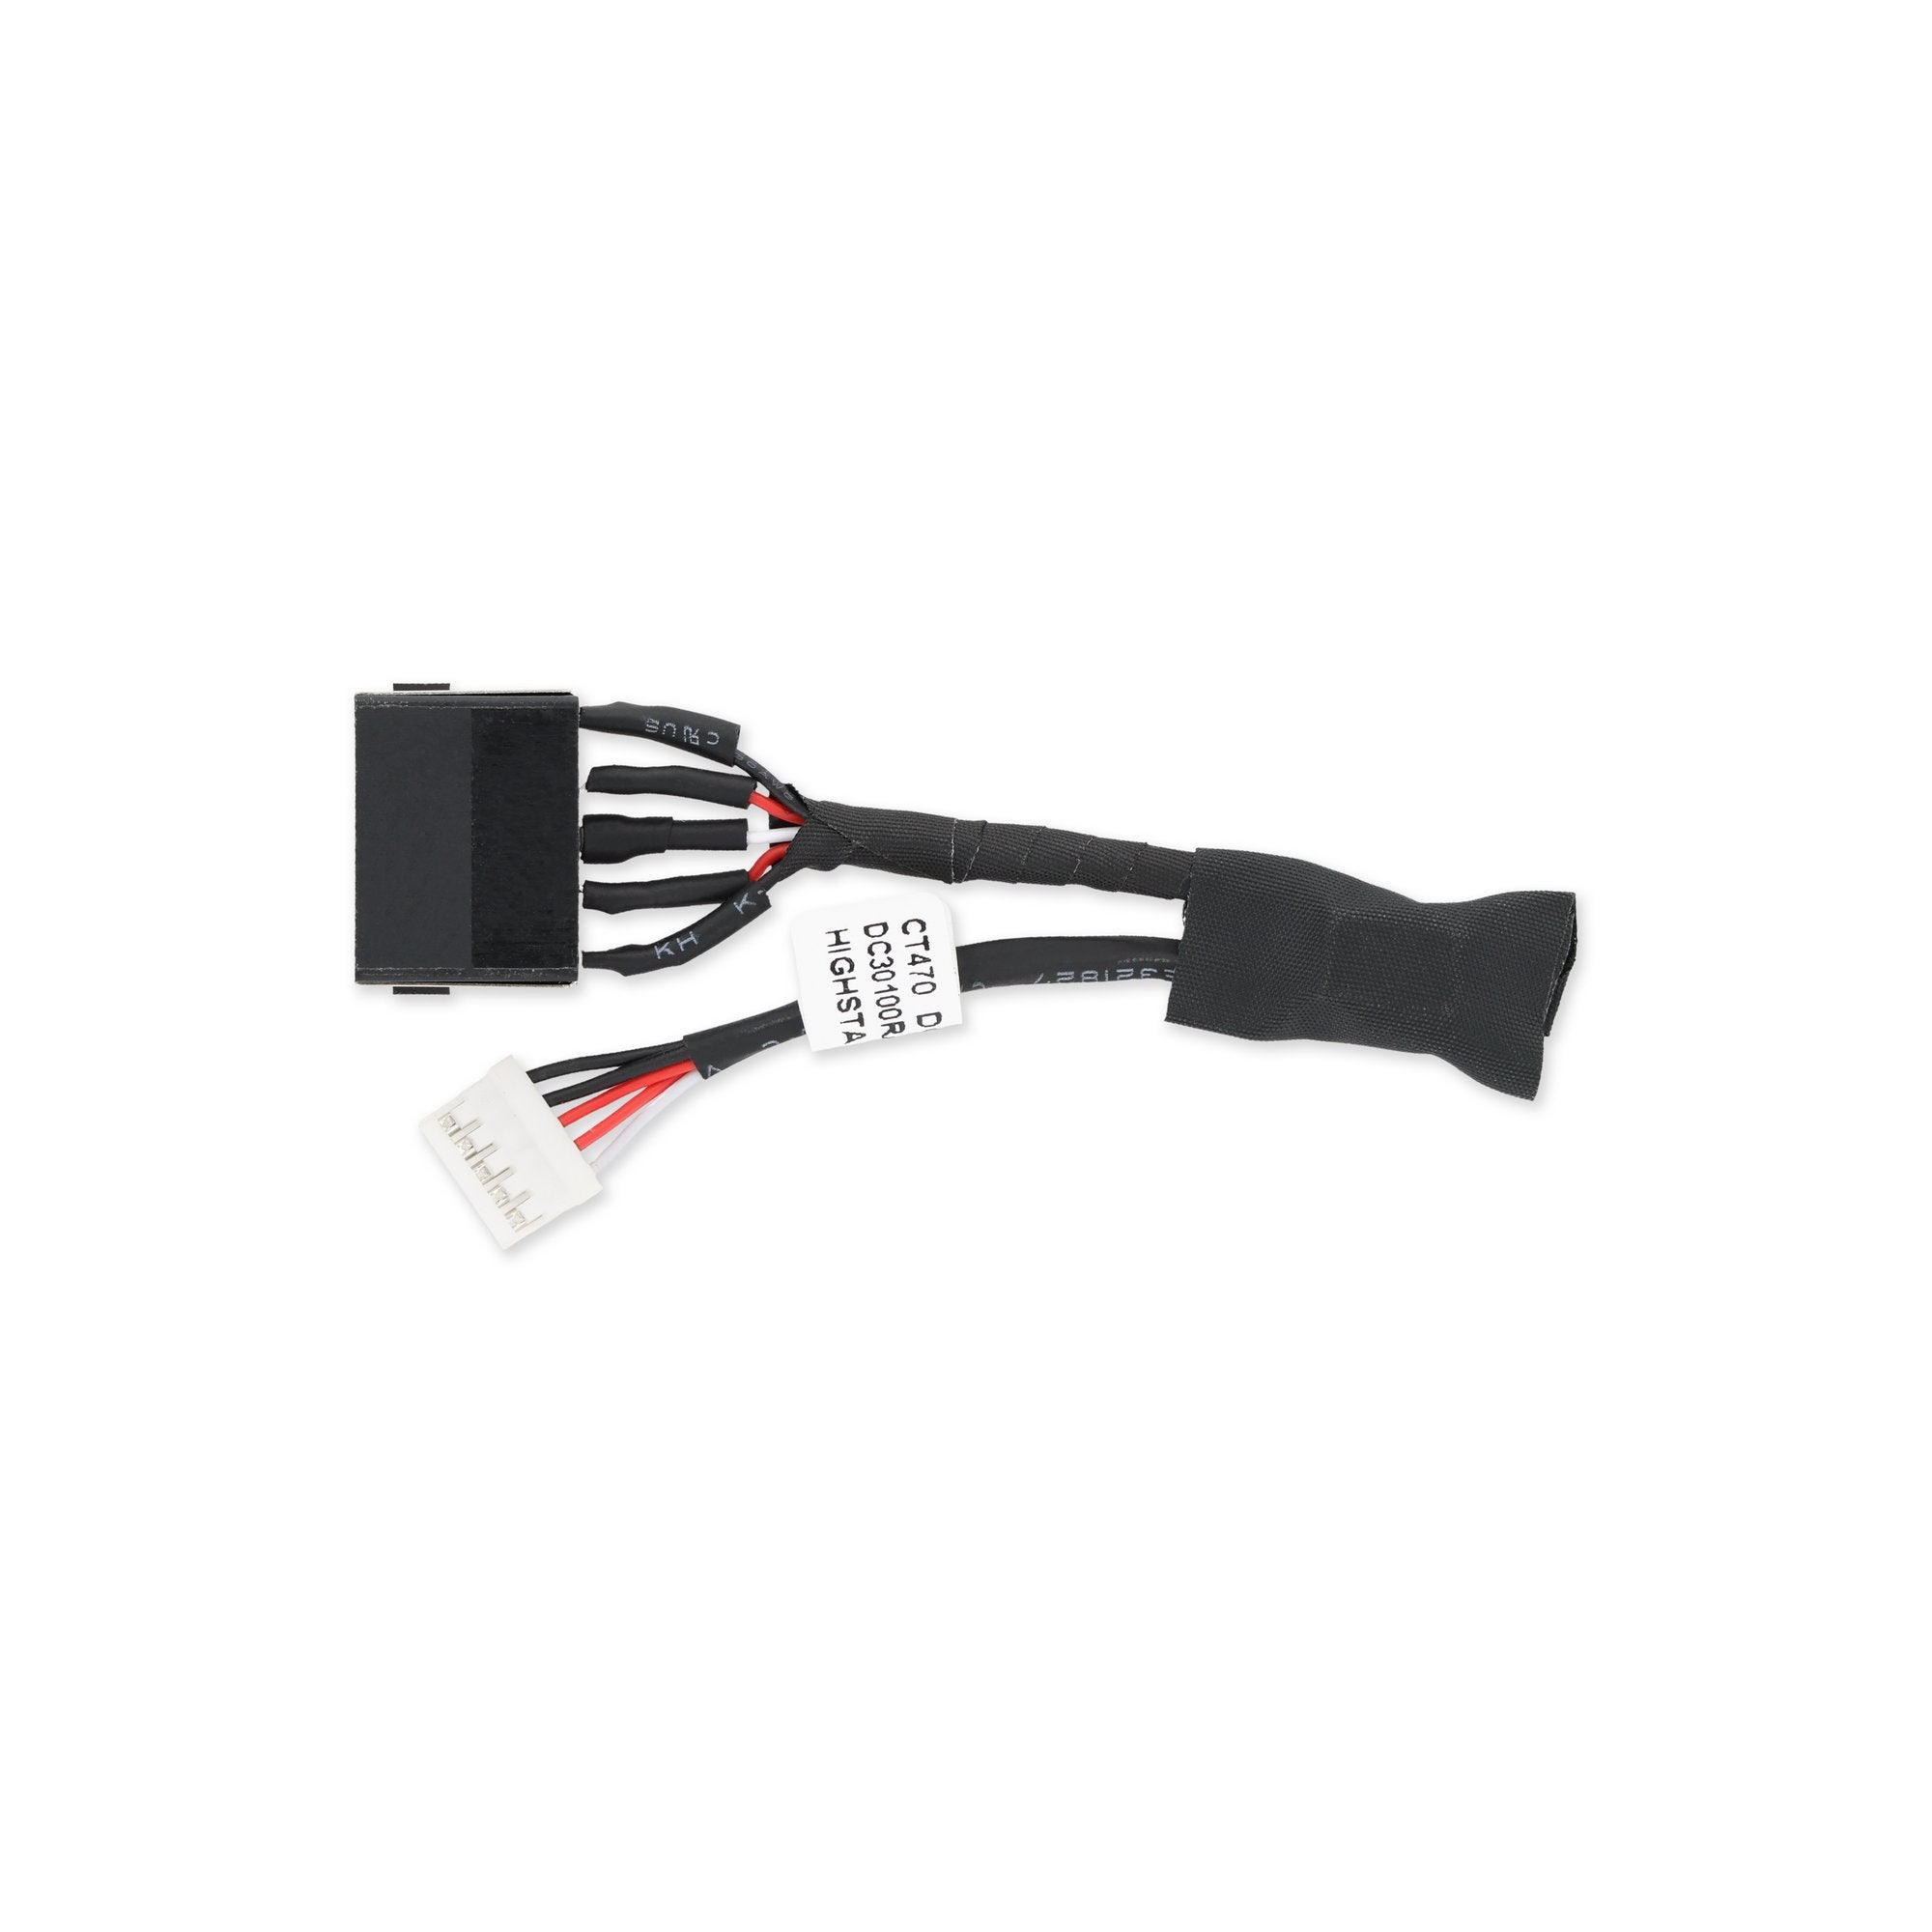 Lenovo DC-IN Cable - DC30100RB00 New